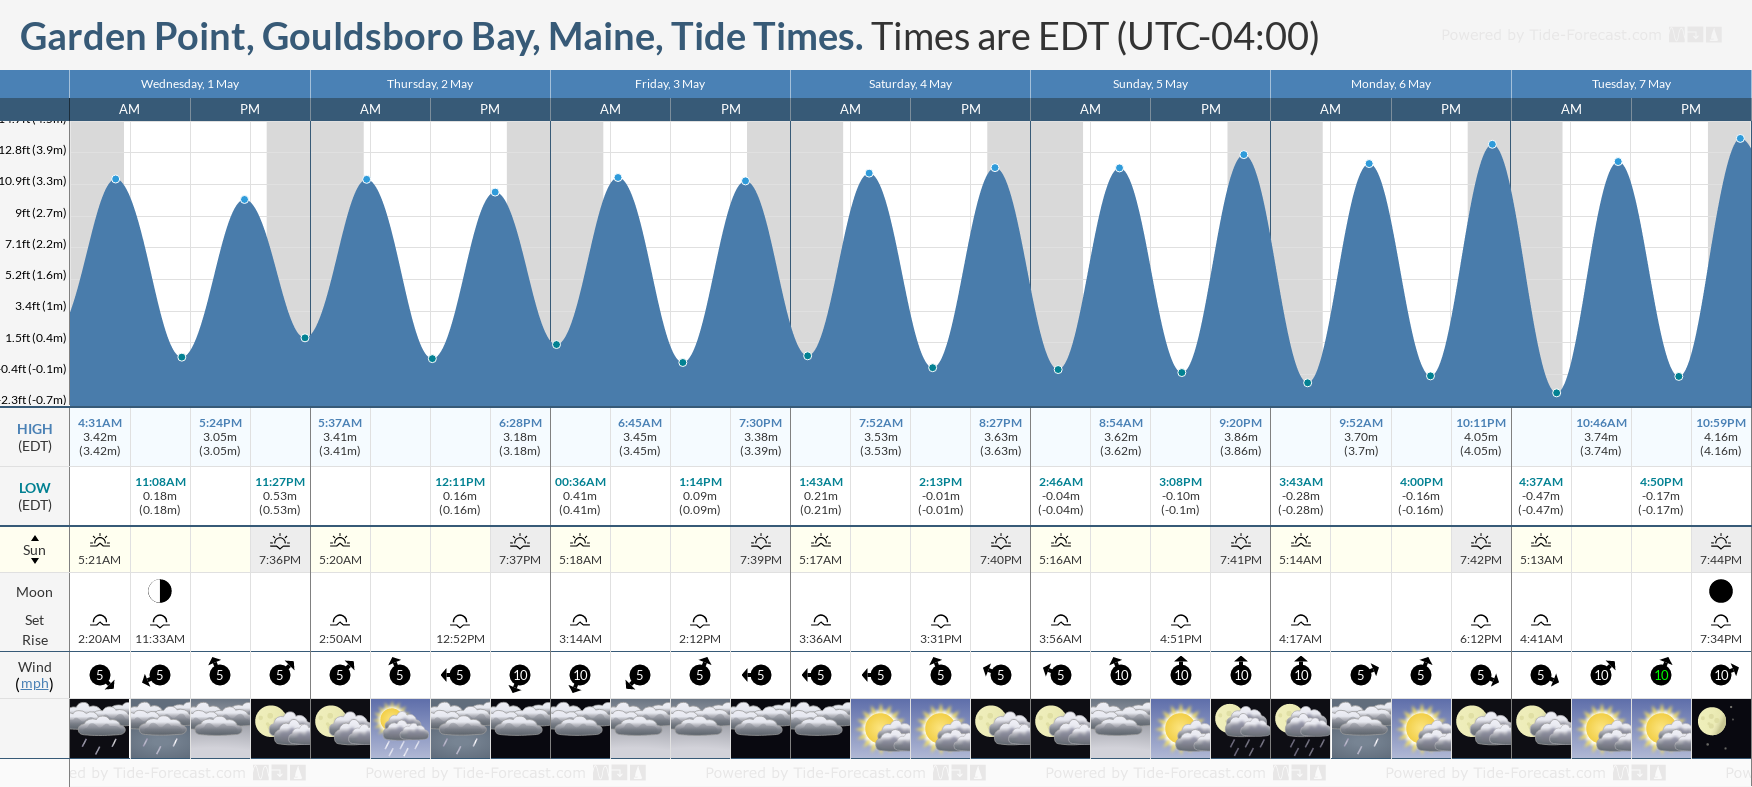 Garden Point, Gouldsboro Bay, Maine Tide Chart including high and low tide tide times for the next 7 days